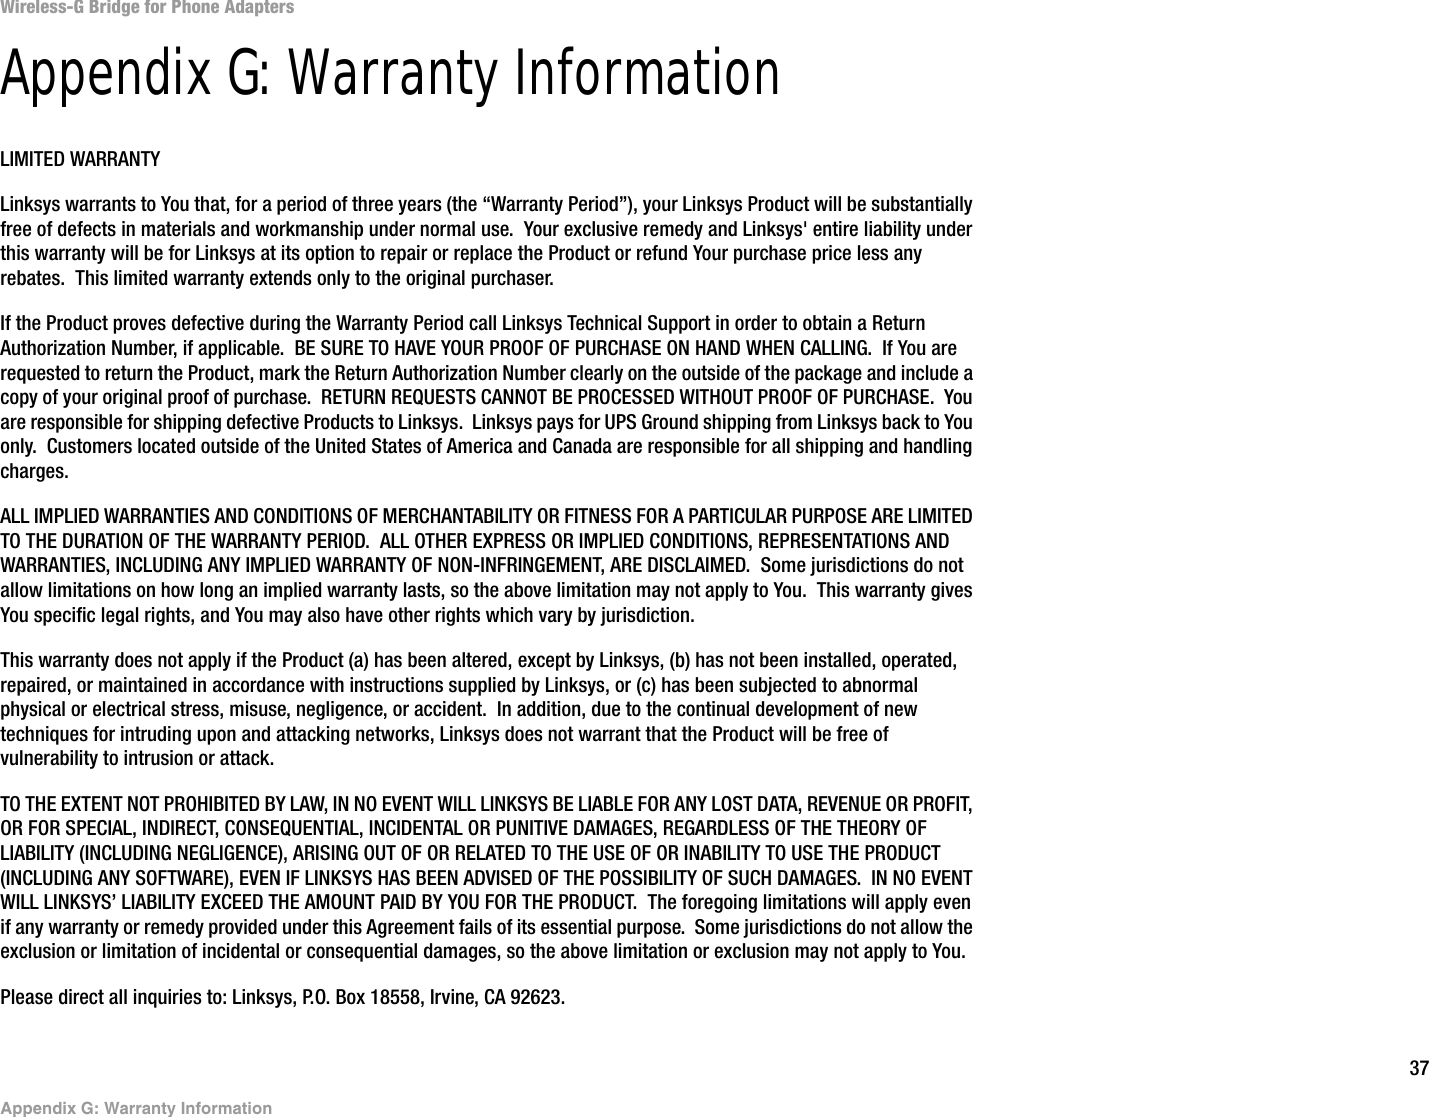 37Appendix G: Warranty InformationWireless-G Bridge for Phone AdaptersAppendix G: Warranty InformationLIMITED WARRANTYLinksys warrants to You that, for a period of three years (the “Warranty Period”), your Linksys Product will be substantially free of defects in materials and workmanship under normal use.  Your exclusive remedy and Linksys&apos; entire liability under this warranty will be for Linksys at its option to repair or replace the Product or refund Your purchase price less any rebates.  This limited warranty extends only to the original purchaser.  If the Product proves defective during the Warranty Period call Linksys Technical Support in order to obtain a Return Authorization Number, if applicable.  BE SURE TO HAVE YOUR PROOF OF PURCHASE ON HAND WHEN CALLING.  If You are requested to return the Product, mark the Return Authorization Number clearly on the outside of the package and include a copy of your original proof of purchase.  RETURN REQUESTS CANNOT BE PROCESSED WITHOUT PROOF OF PURCHASE.  You are responsible for shipping defective Products to Linksys.  Linksys pays for UPS Ground shipping from Linksys back to You only.  Customers located outside of the United States of America and Canada are responsible for all shipping and handling charges. ALL IMPLIED WARRANTIES AND CONDITIONS OF MERCHANTABILITY OR FITNESS FOR A PARTICULAR PURPOSE ARE LIMITED TO THE DURATION OF THE WARRANTY PERIOD.  ALL OTHER EXPRESS OR IMPLIED CONDITIONS, REPRESENTATIONS AND WARRANTIES, INCLUDING ANY IMPLIED WARRANTY OF NON-INFRINGEMENT, ARE DISCLAIMED.  Some jurisdictions do not allow limitations on how long an implied warranty lasts, so the above limitation may not apply to You.  This warranty gives You specific legal rights, and You may also have other rights which vary by jurisdiction.This warranty does not apply if the Product (a) has been altered, except by Linksys, (b) has not been installed, operated, repaired, or maintained in accordance with instructions supplied by Linksys, or (c) has been subjected to abnormal physical or electrical stress, misuse, negligence, or accident.  In addition, due to the continual development of new techniques for intruding upon and attacking networks, Linksys does not warrant that the Product will be free of vulnerability to intrusion or attack.TO THE EXTENT NOT PROHIBITED BY LAW, IN NO EVENT WILL LINKSYS BE LIABLE FOR ANY LOST DATA, REVENUE OR PROFIT, OR FOR SPECIAL, INDIRECT, CONSEQUENTIAL, INCIDENTAL OR PUNITIVE DAMAGES, REGARDLESS OF THE THEORY OF LIABILITY (INCLUDING NEGLIGENCE), ARISING OUT OF OR RELATED TO THE USE OF OR INABILITY TO USE THE PRODUCT (INCLUDING ANY SOFTWARE), EVEN IF LINKSYS HAS BEEN ADVISED OF THE POSSIBILITY OF SUCH DAMAGES.  IN NO EVENT WILL LINKSYS’ LIABILITY EXCEED THE AMOUNT PAID BY YOU FOR THE PRODUCT.  The foregoing limitations will apply even if any warranty or remedy provided under this Agreement fails of its essential purpose.  Some jurisdictions do not allow the exclusion or limitation of incidental or consequential damages, so the above limitation or exclusion may not apply to You.Please direct all inquiries to: Linksys, P.O. Box 18558, Irvine, CA 92623.